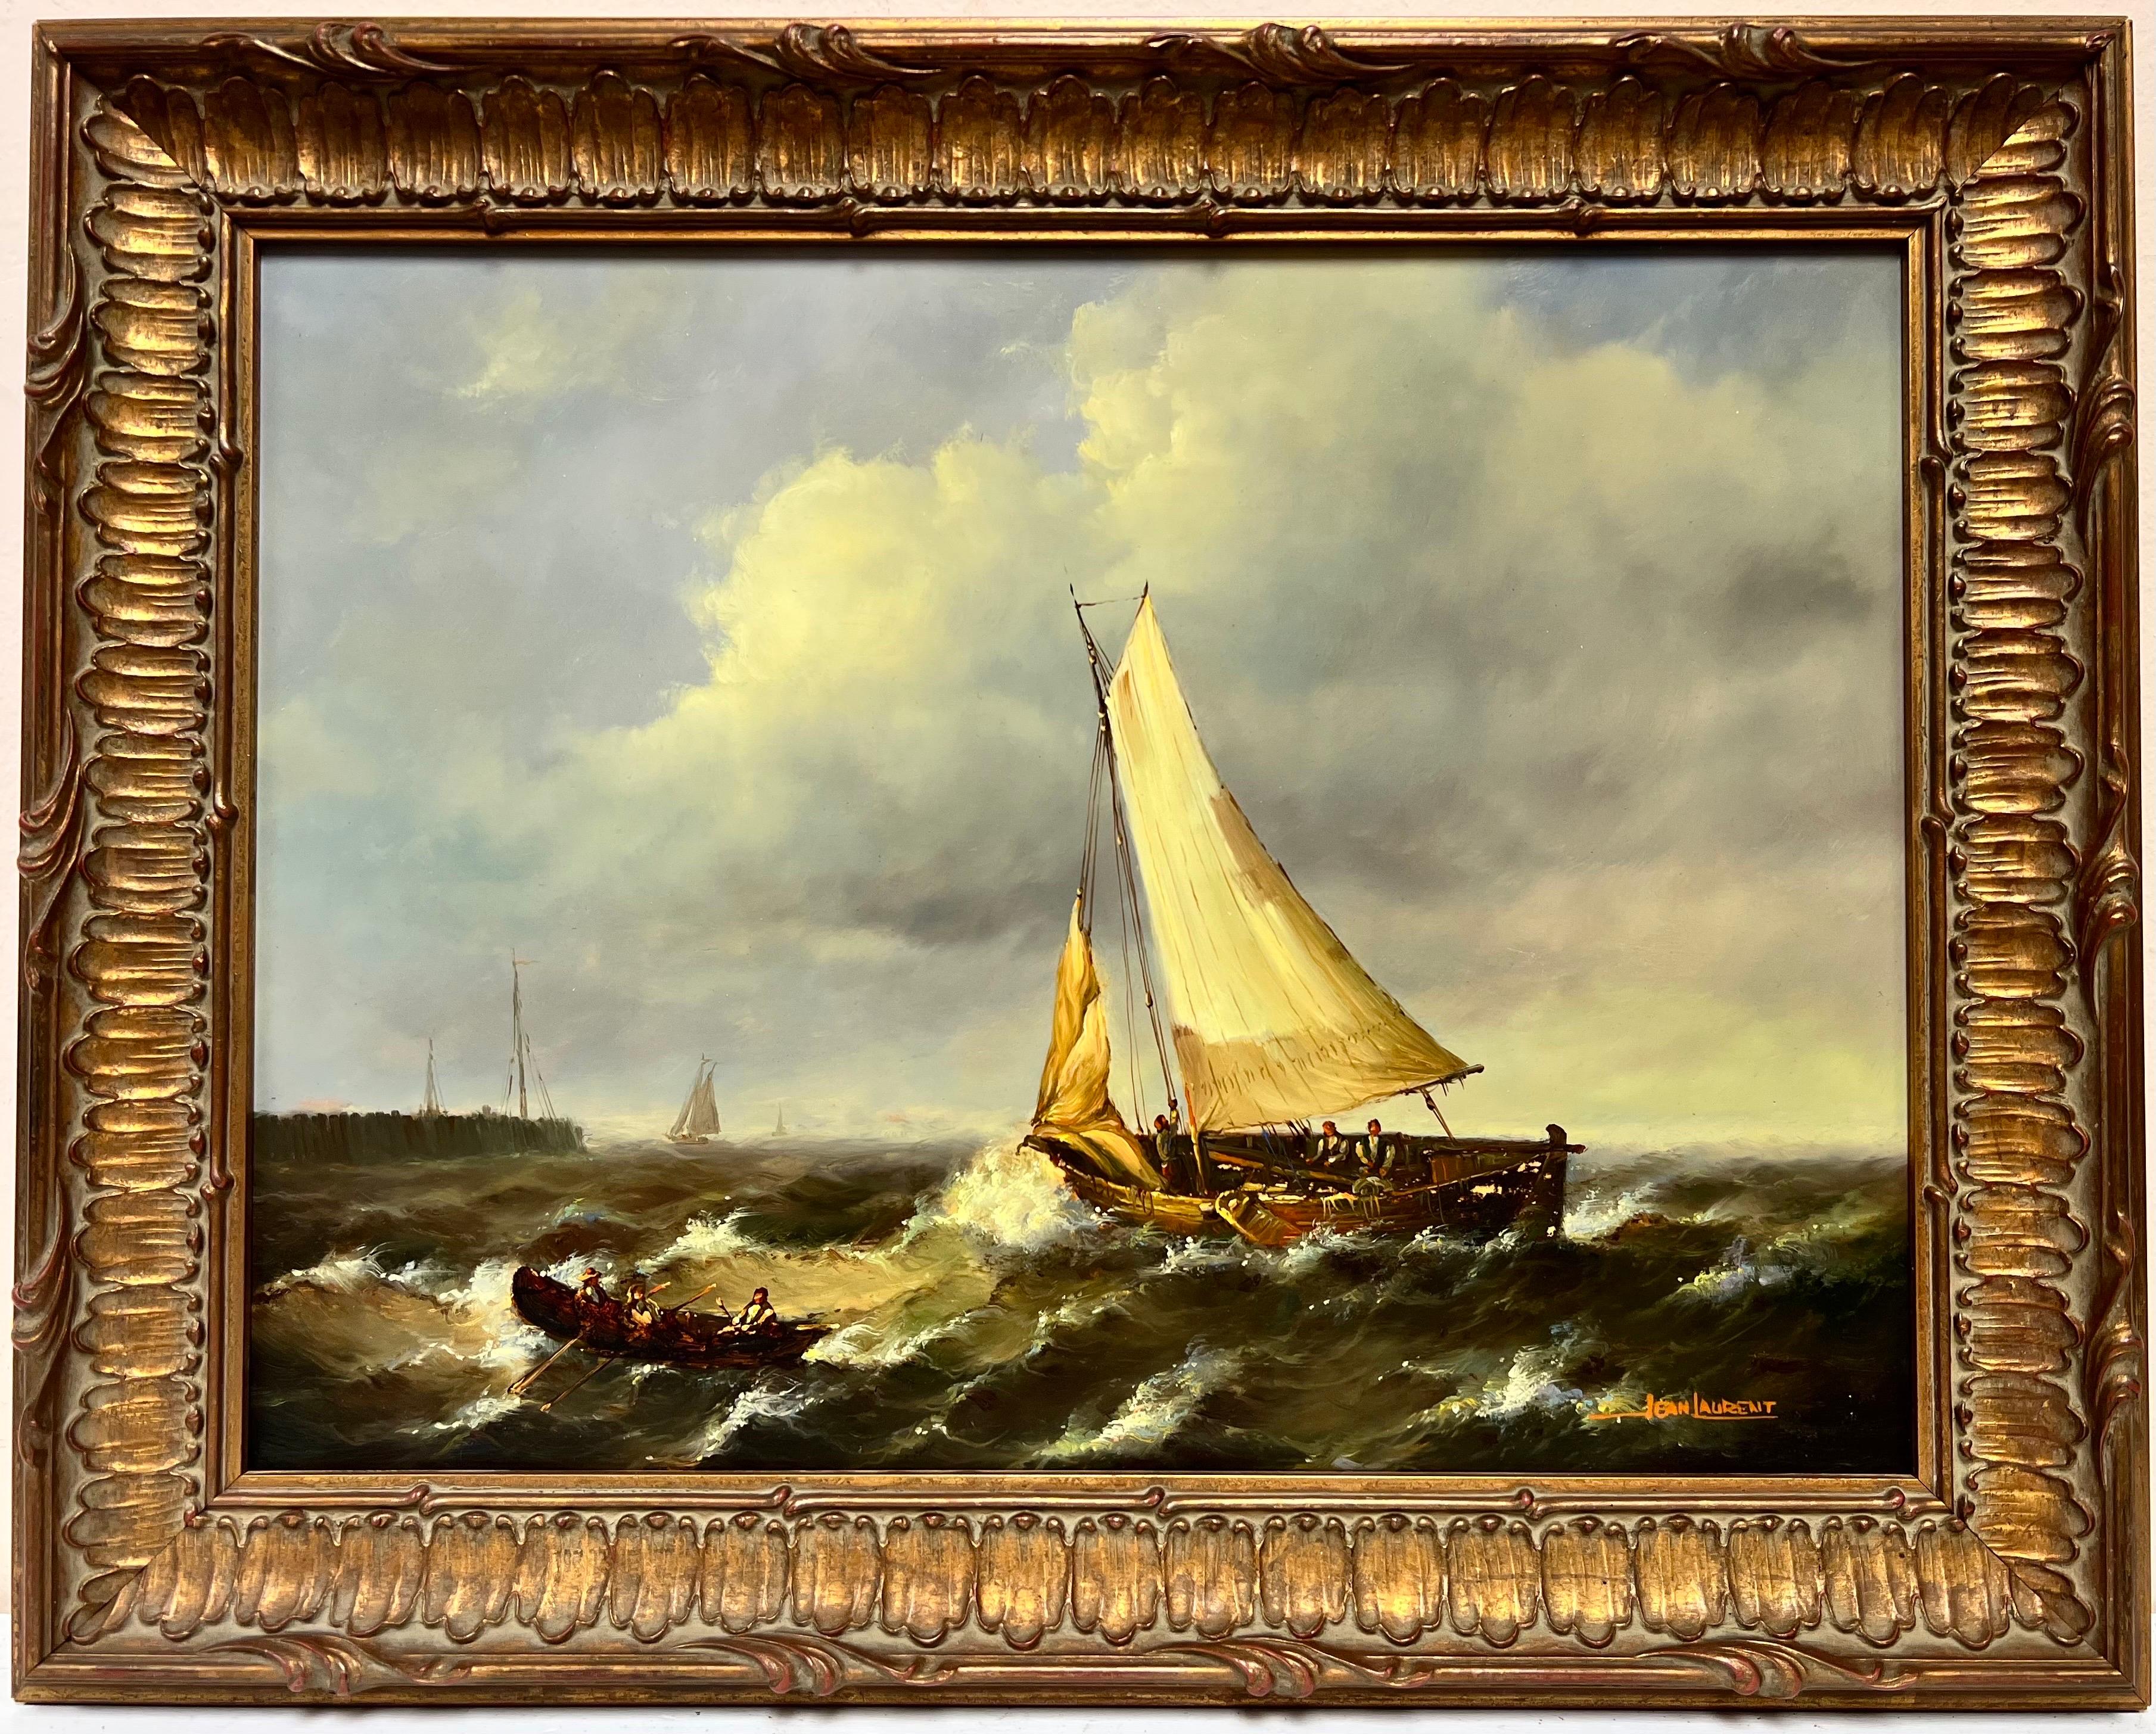 Jean Laurent Figurative Painting - Fine French Marine Oil Painting Fishing Boat on Choppy Seas, signed original